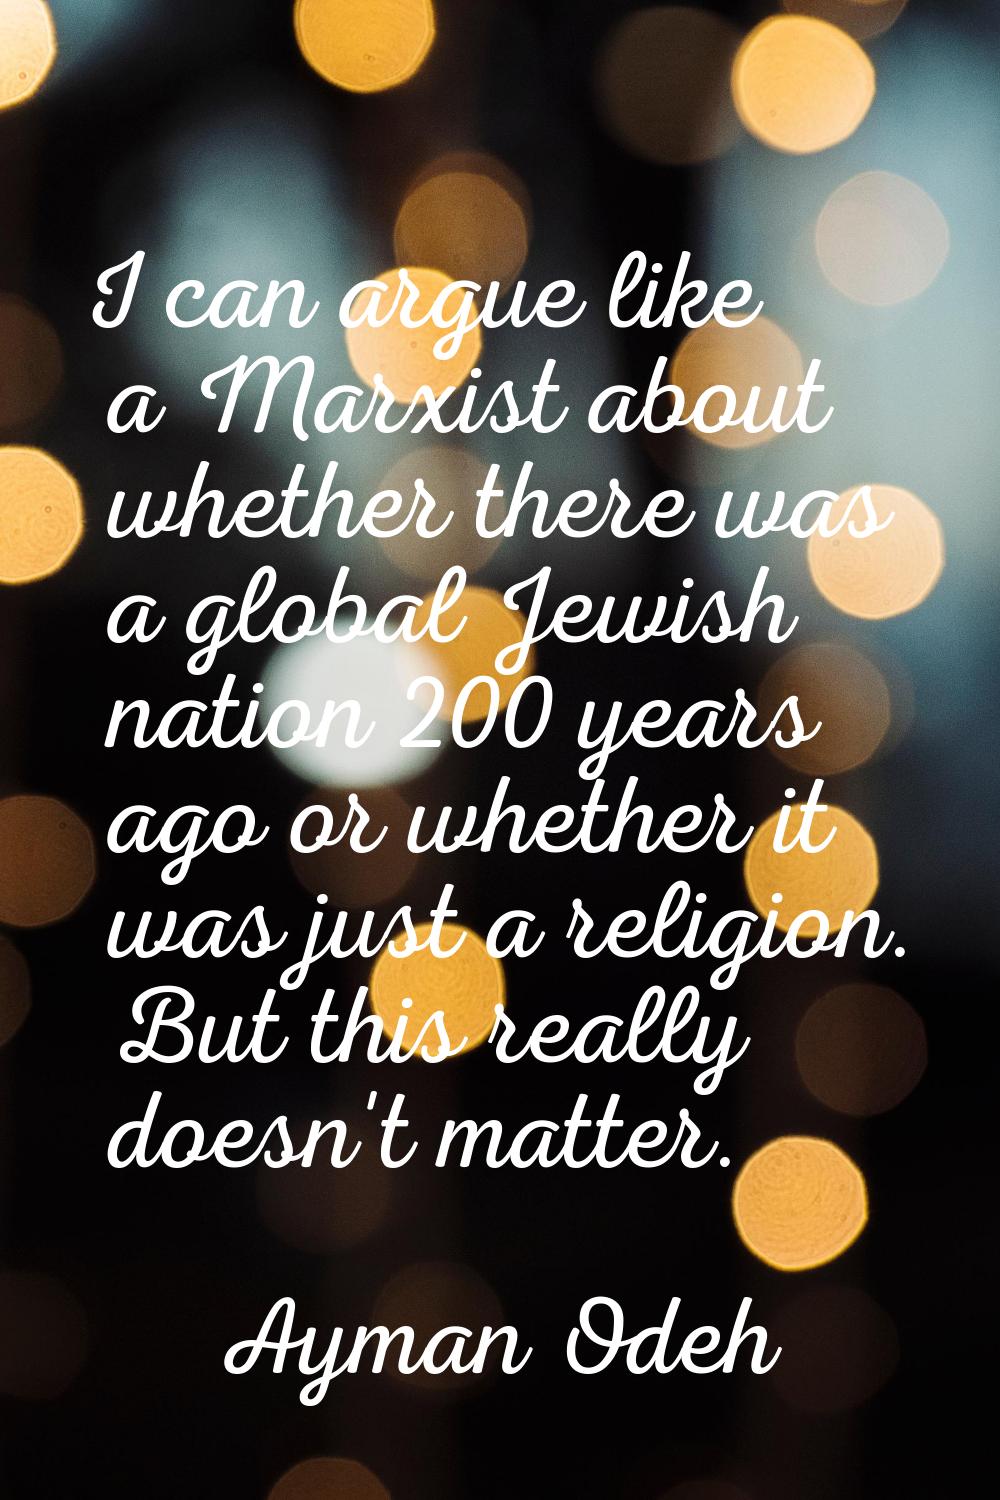 I can argue like a Marxist about whether there was a global Jewish nation 200 years ago or whether 